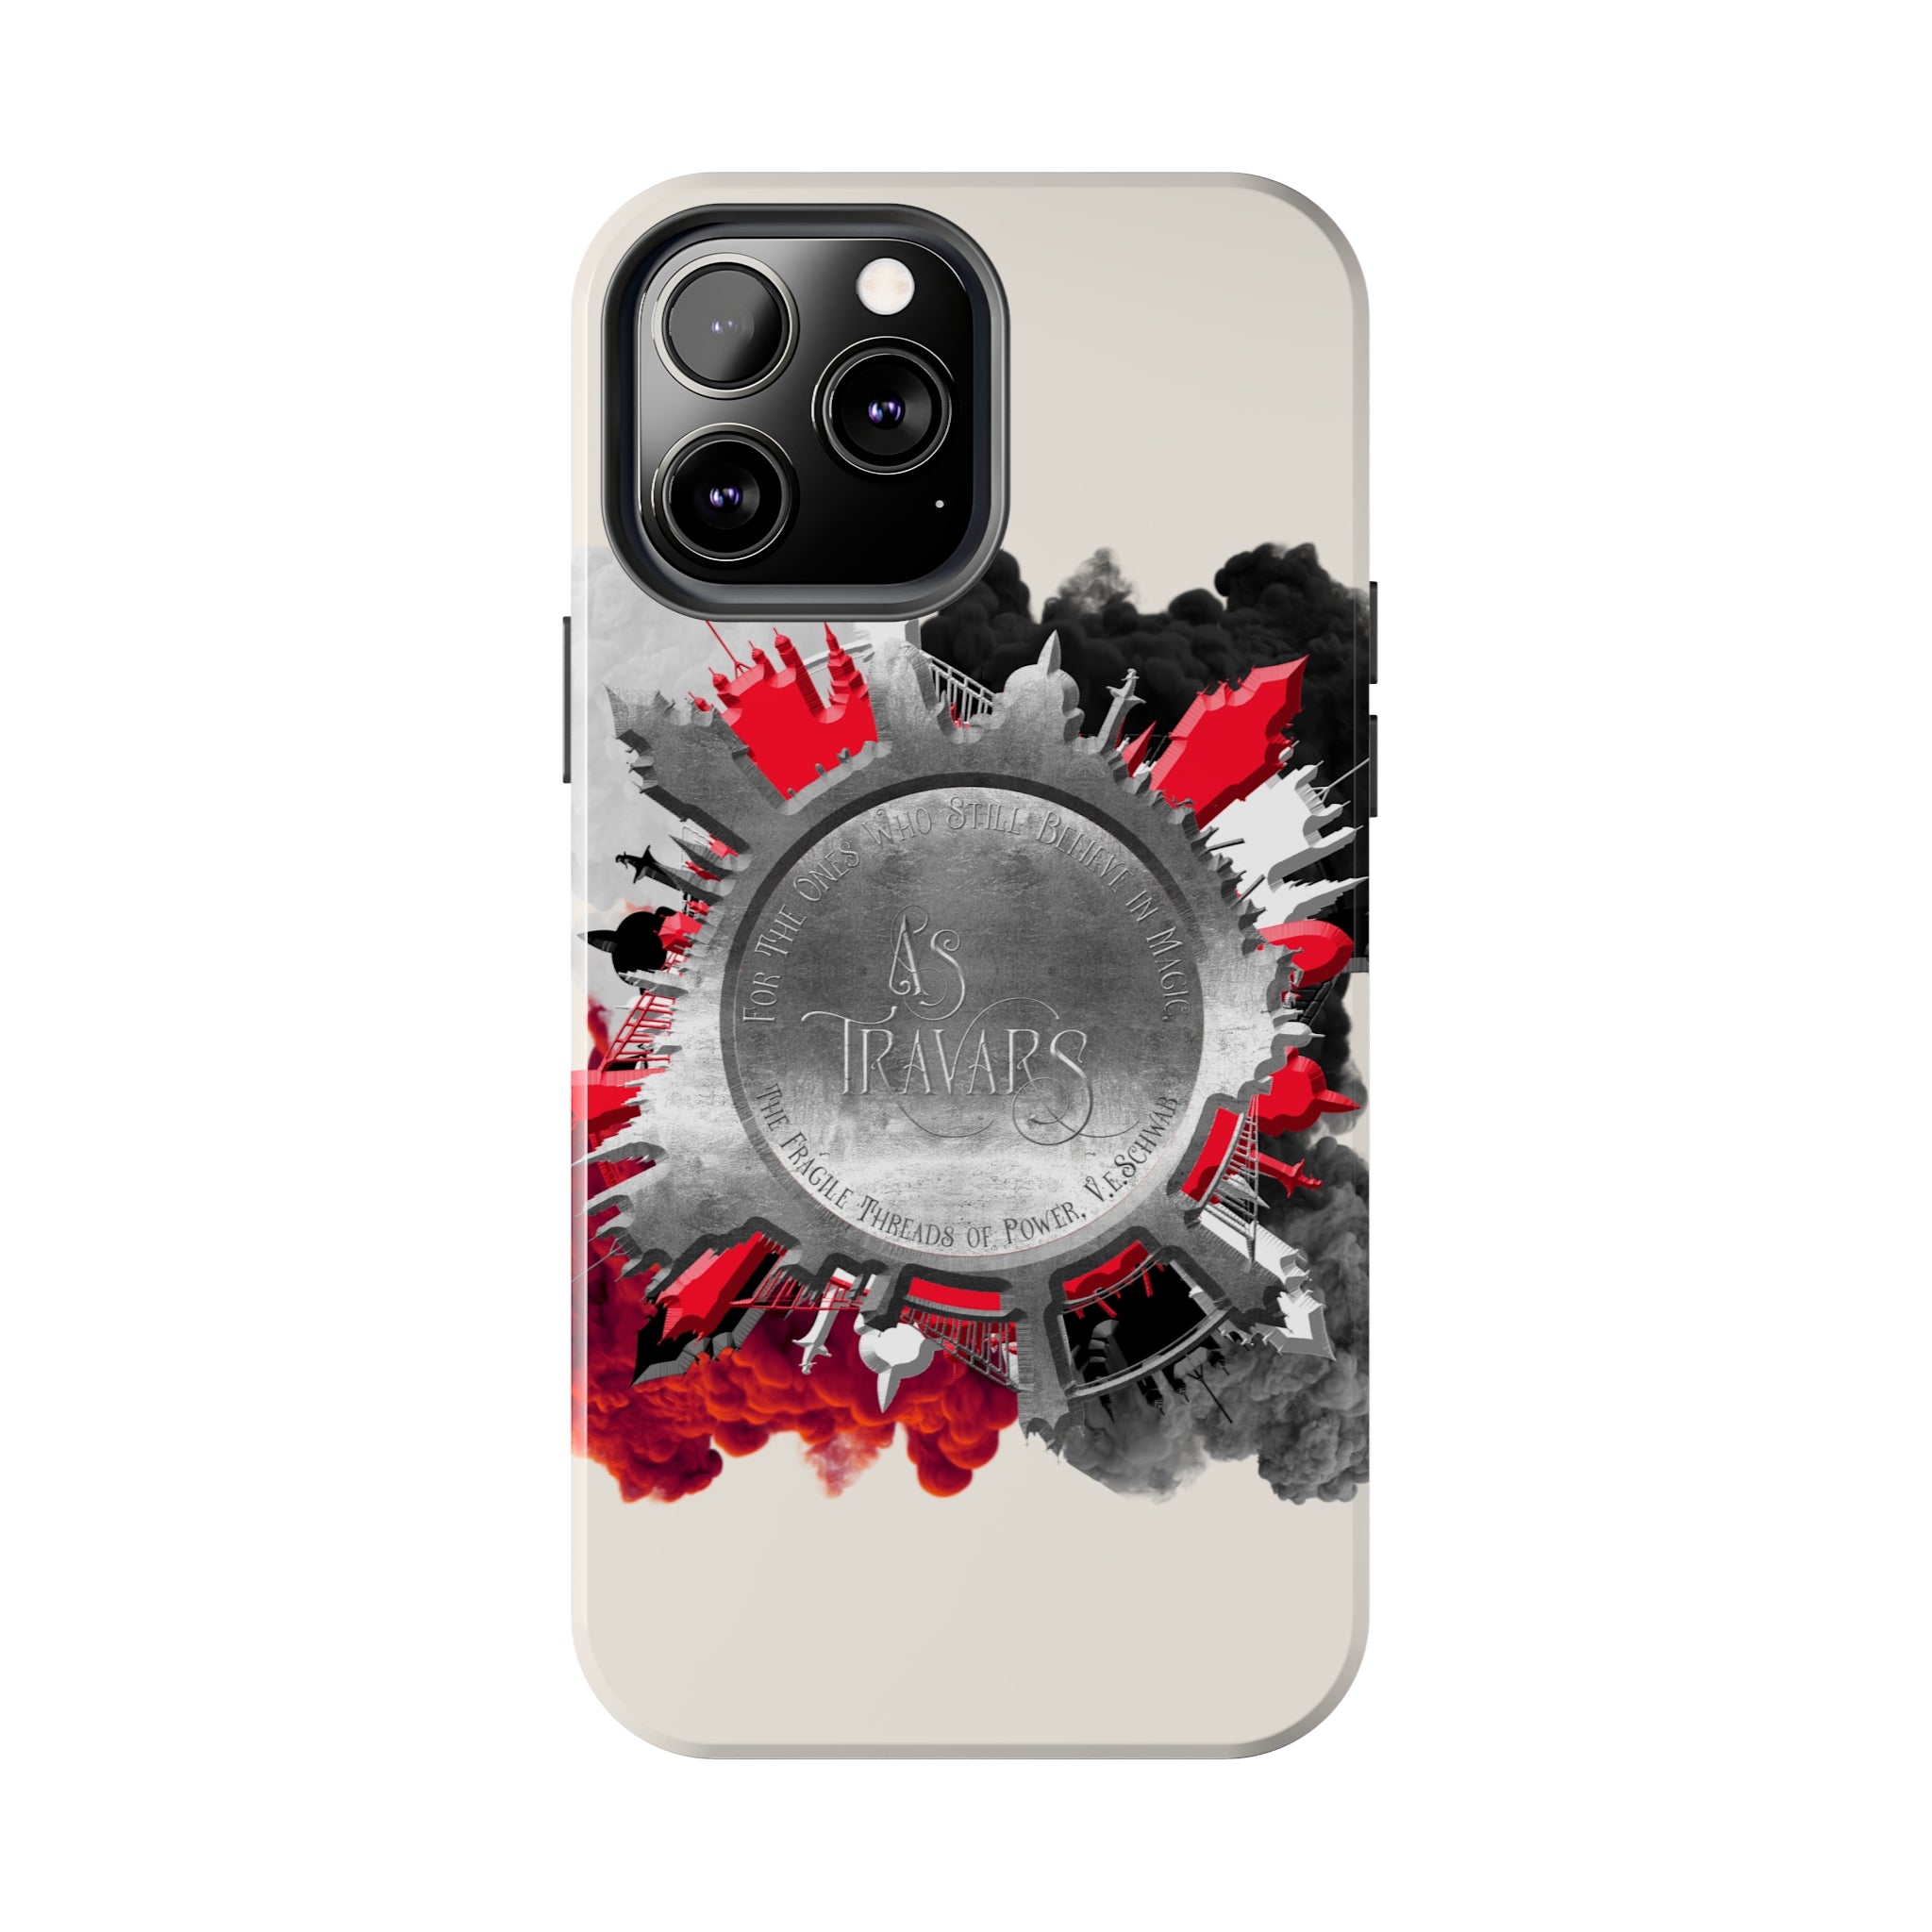 As Travars. The Fragile Threads of Power Tough iPhone Case